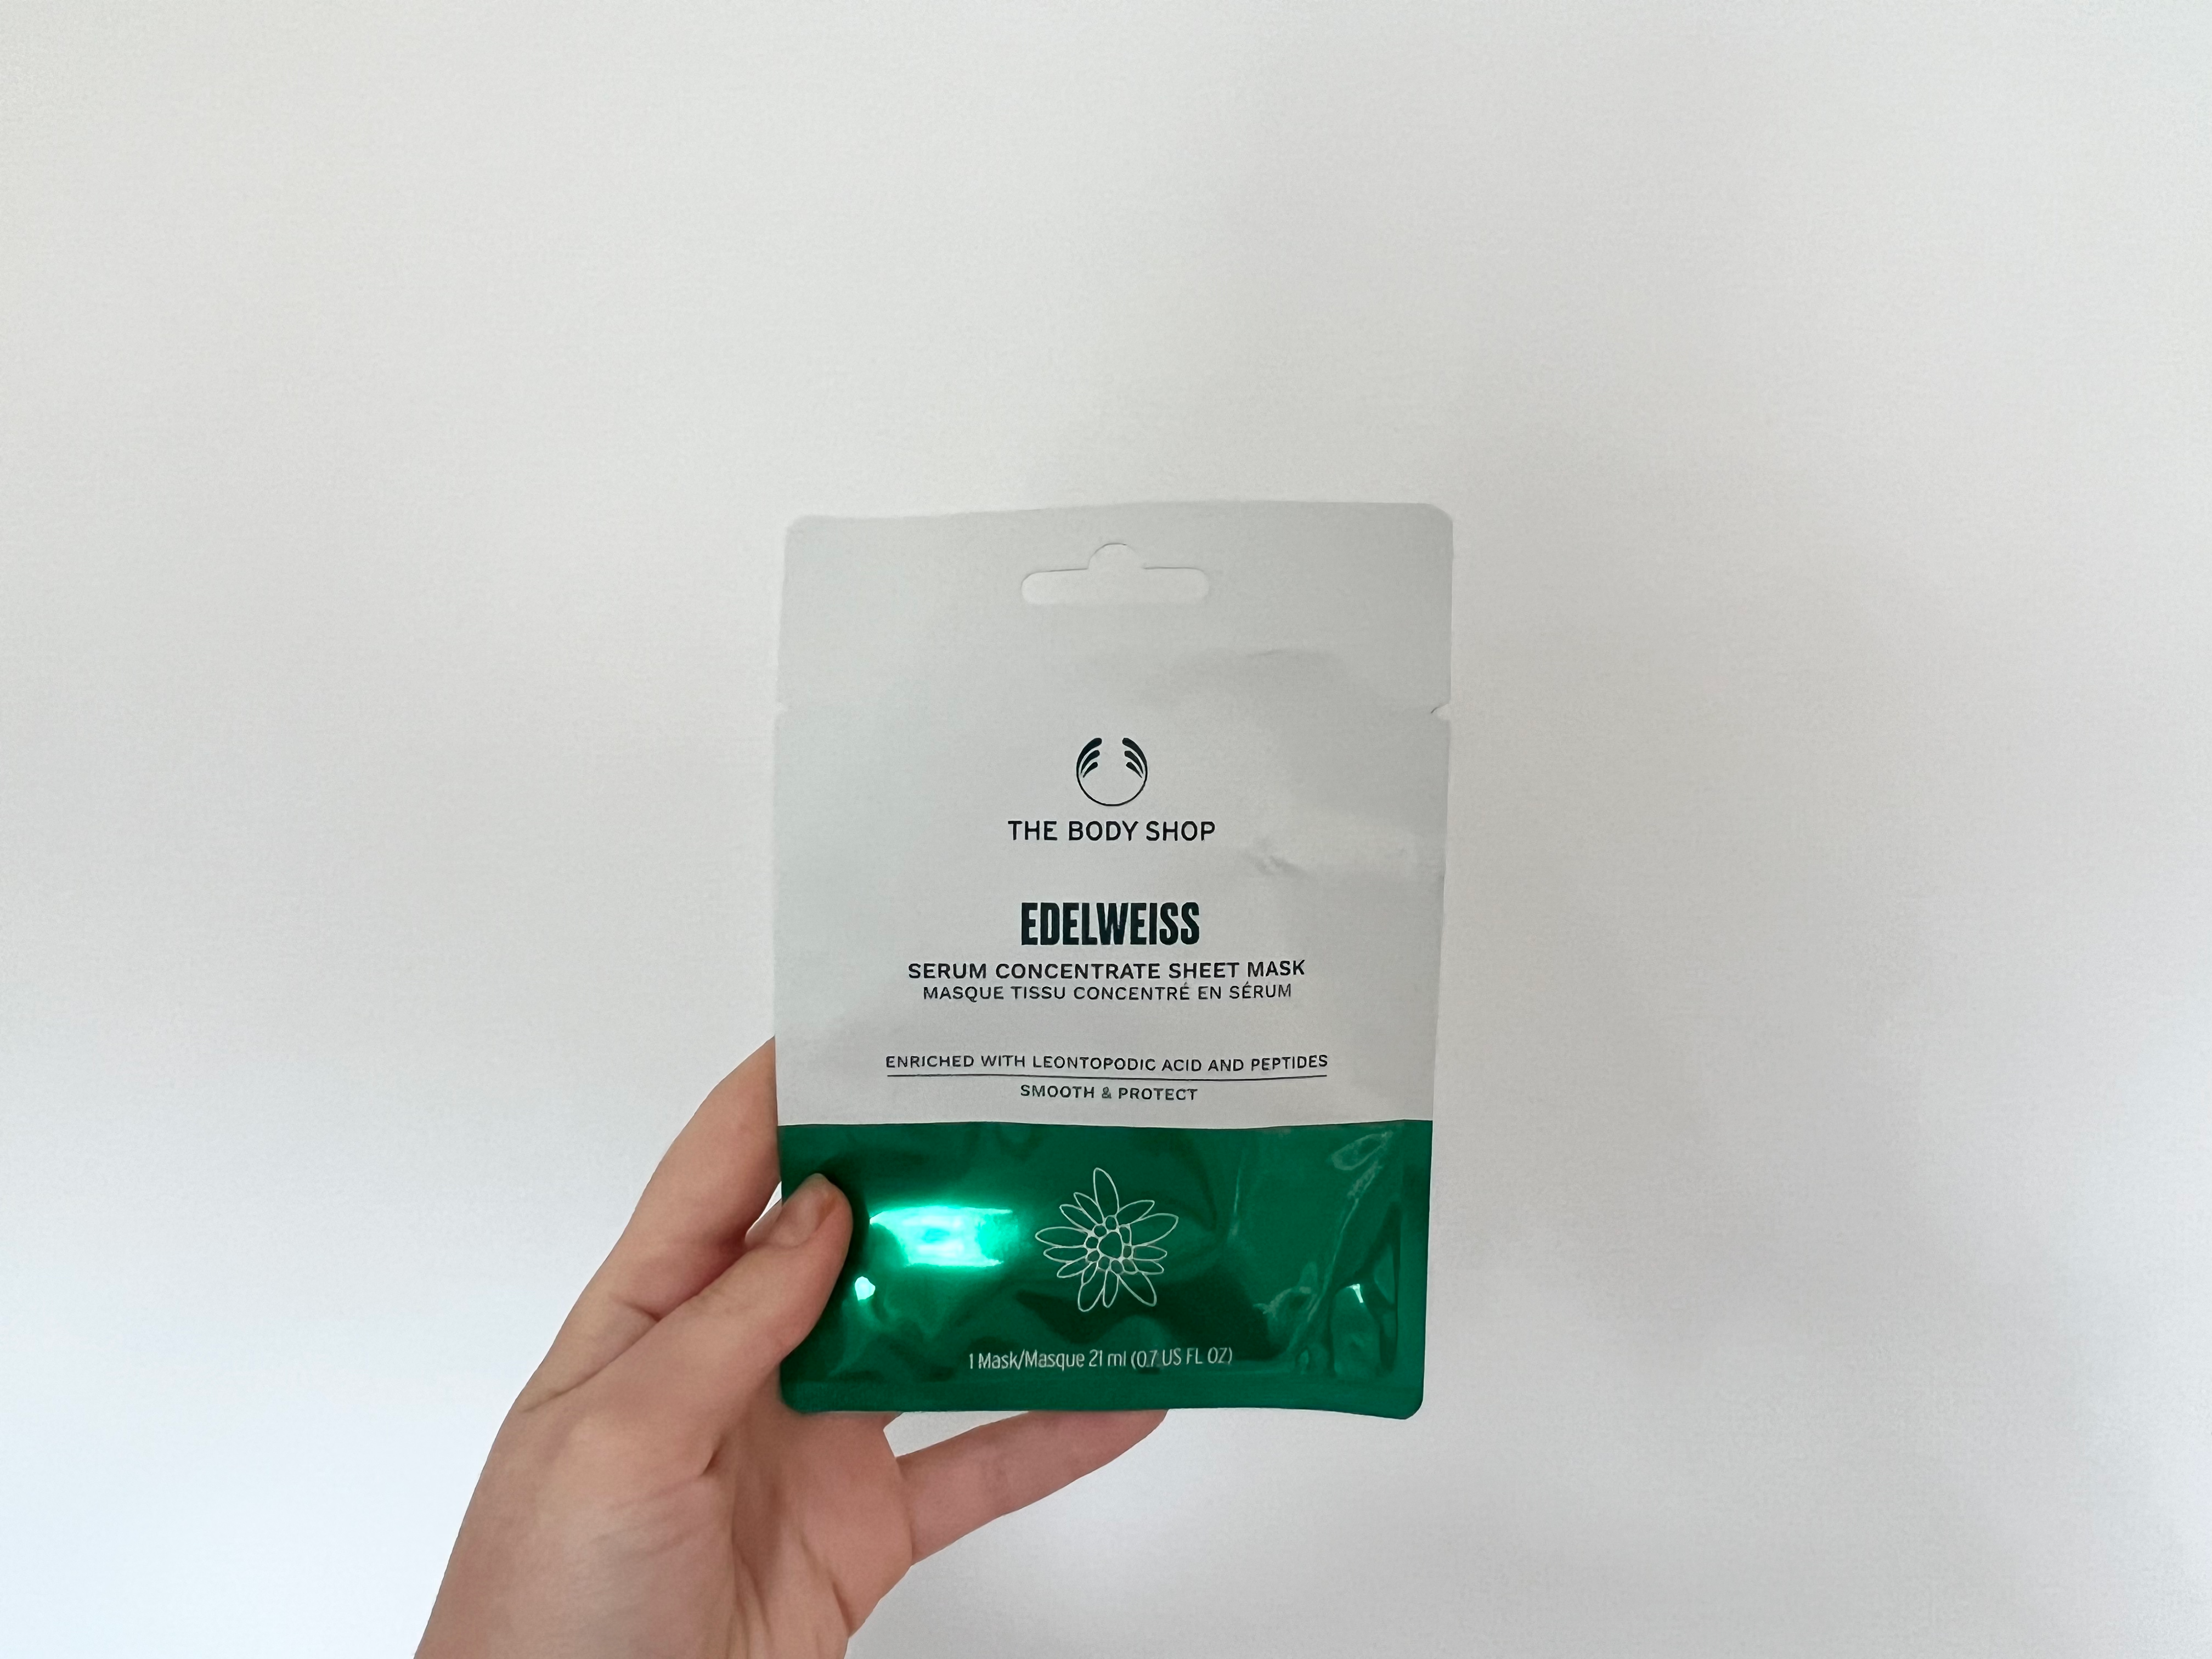 The Body Shop edelweiss serum concentrate sheet mask